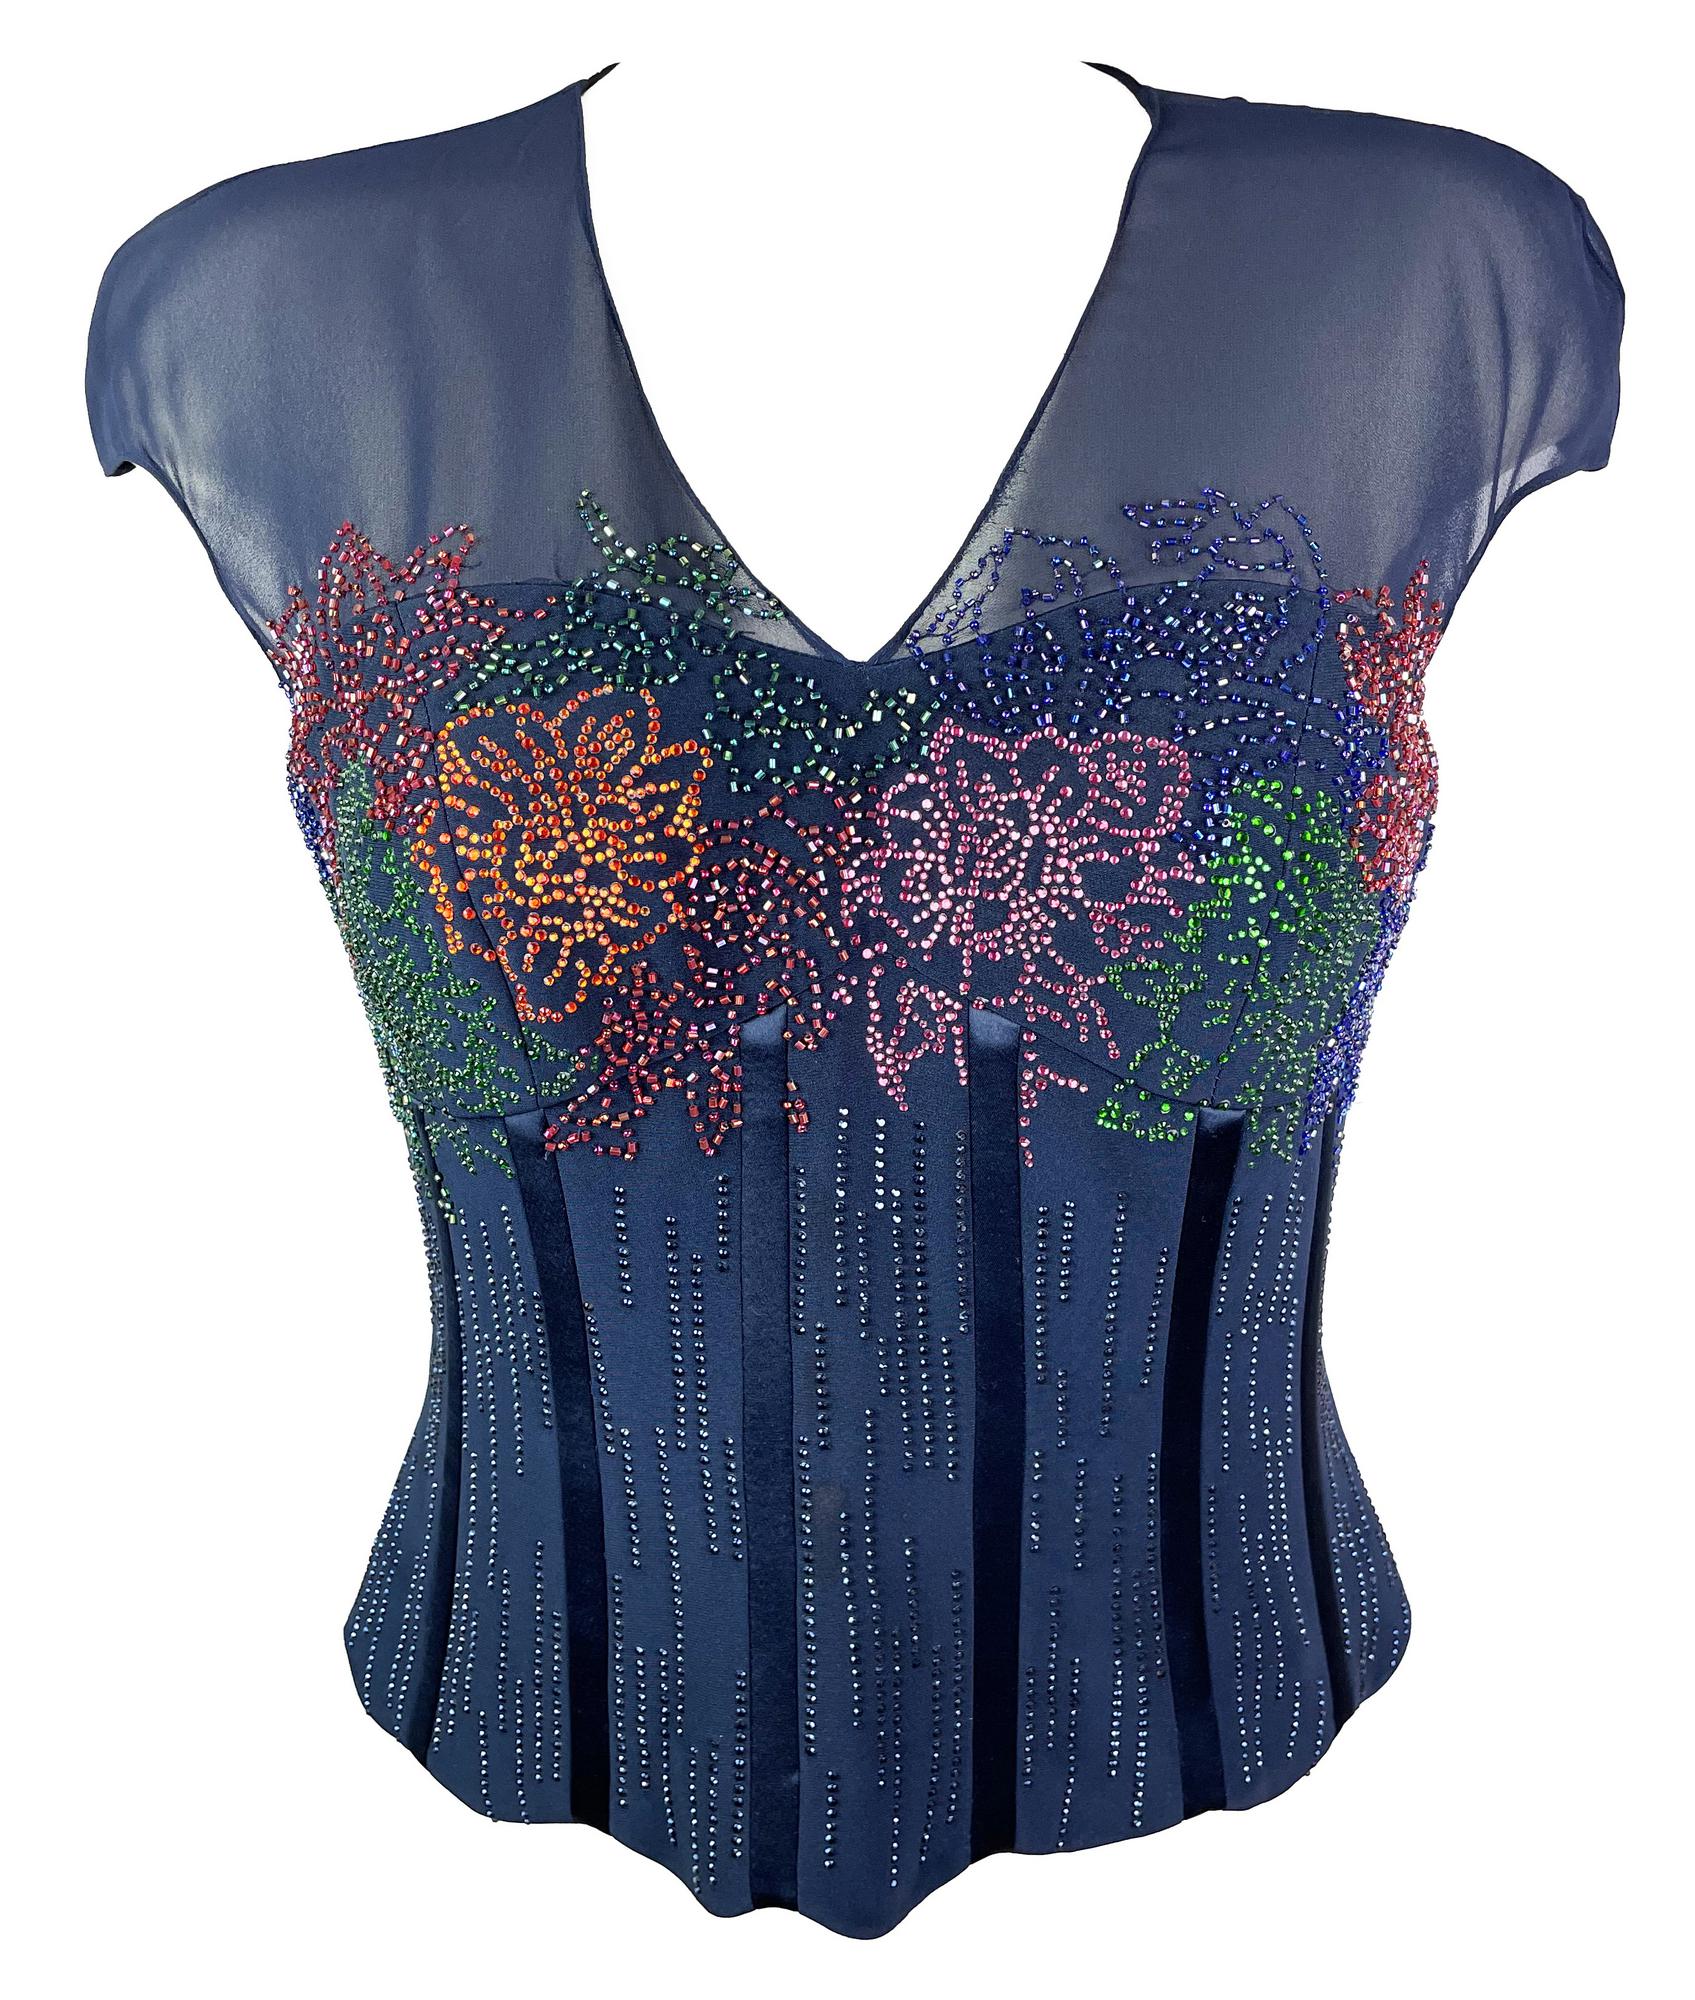 MUSANI BONED TOP Description: Navy blue boned top decorated with multicolored...